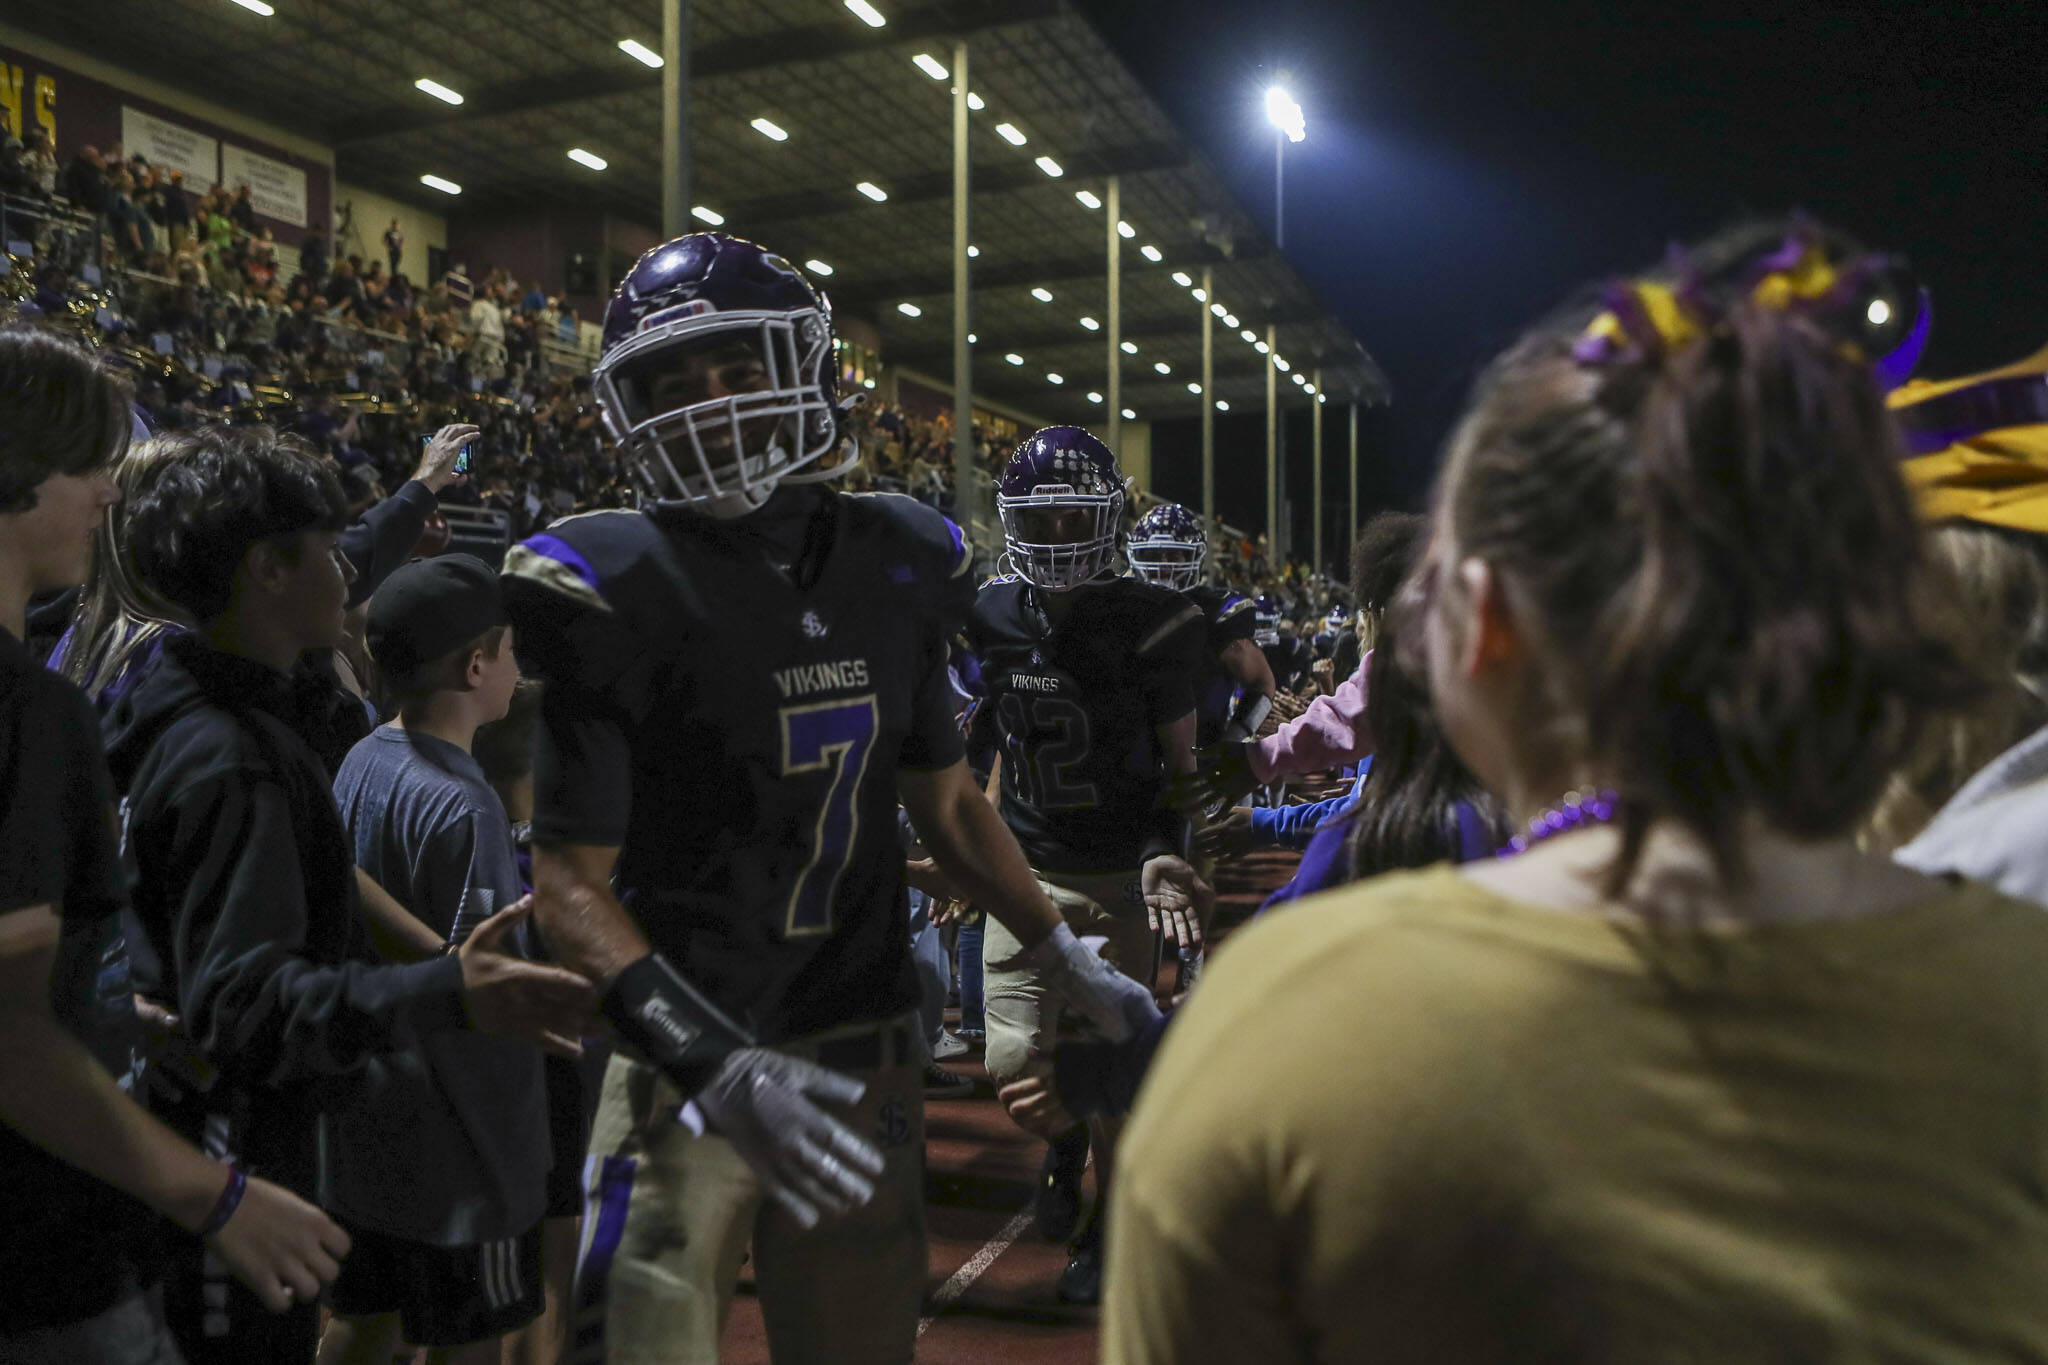 Lake Stevens players run through a tunnel after a football game between Lake Stevens and Garfield at Lake Stevens High School in Lake Stevens, Washington on Friday, Sept. 1, 2023. Lake Stevens lead 20-7 at the half. The Vikings took the win, 48-21. (Annie Barker / The Herald)